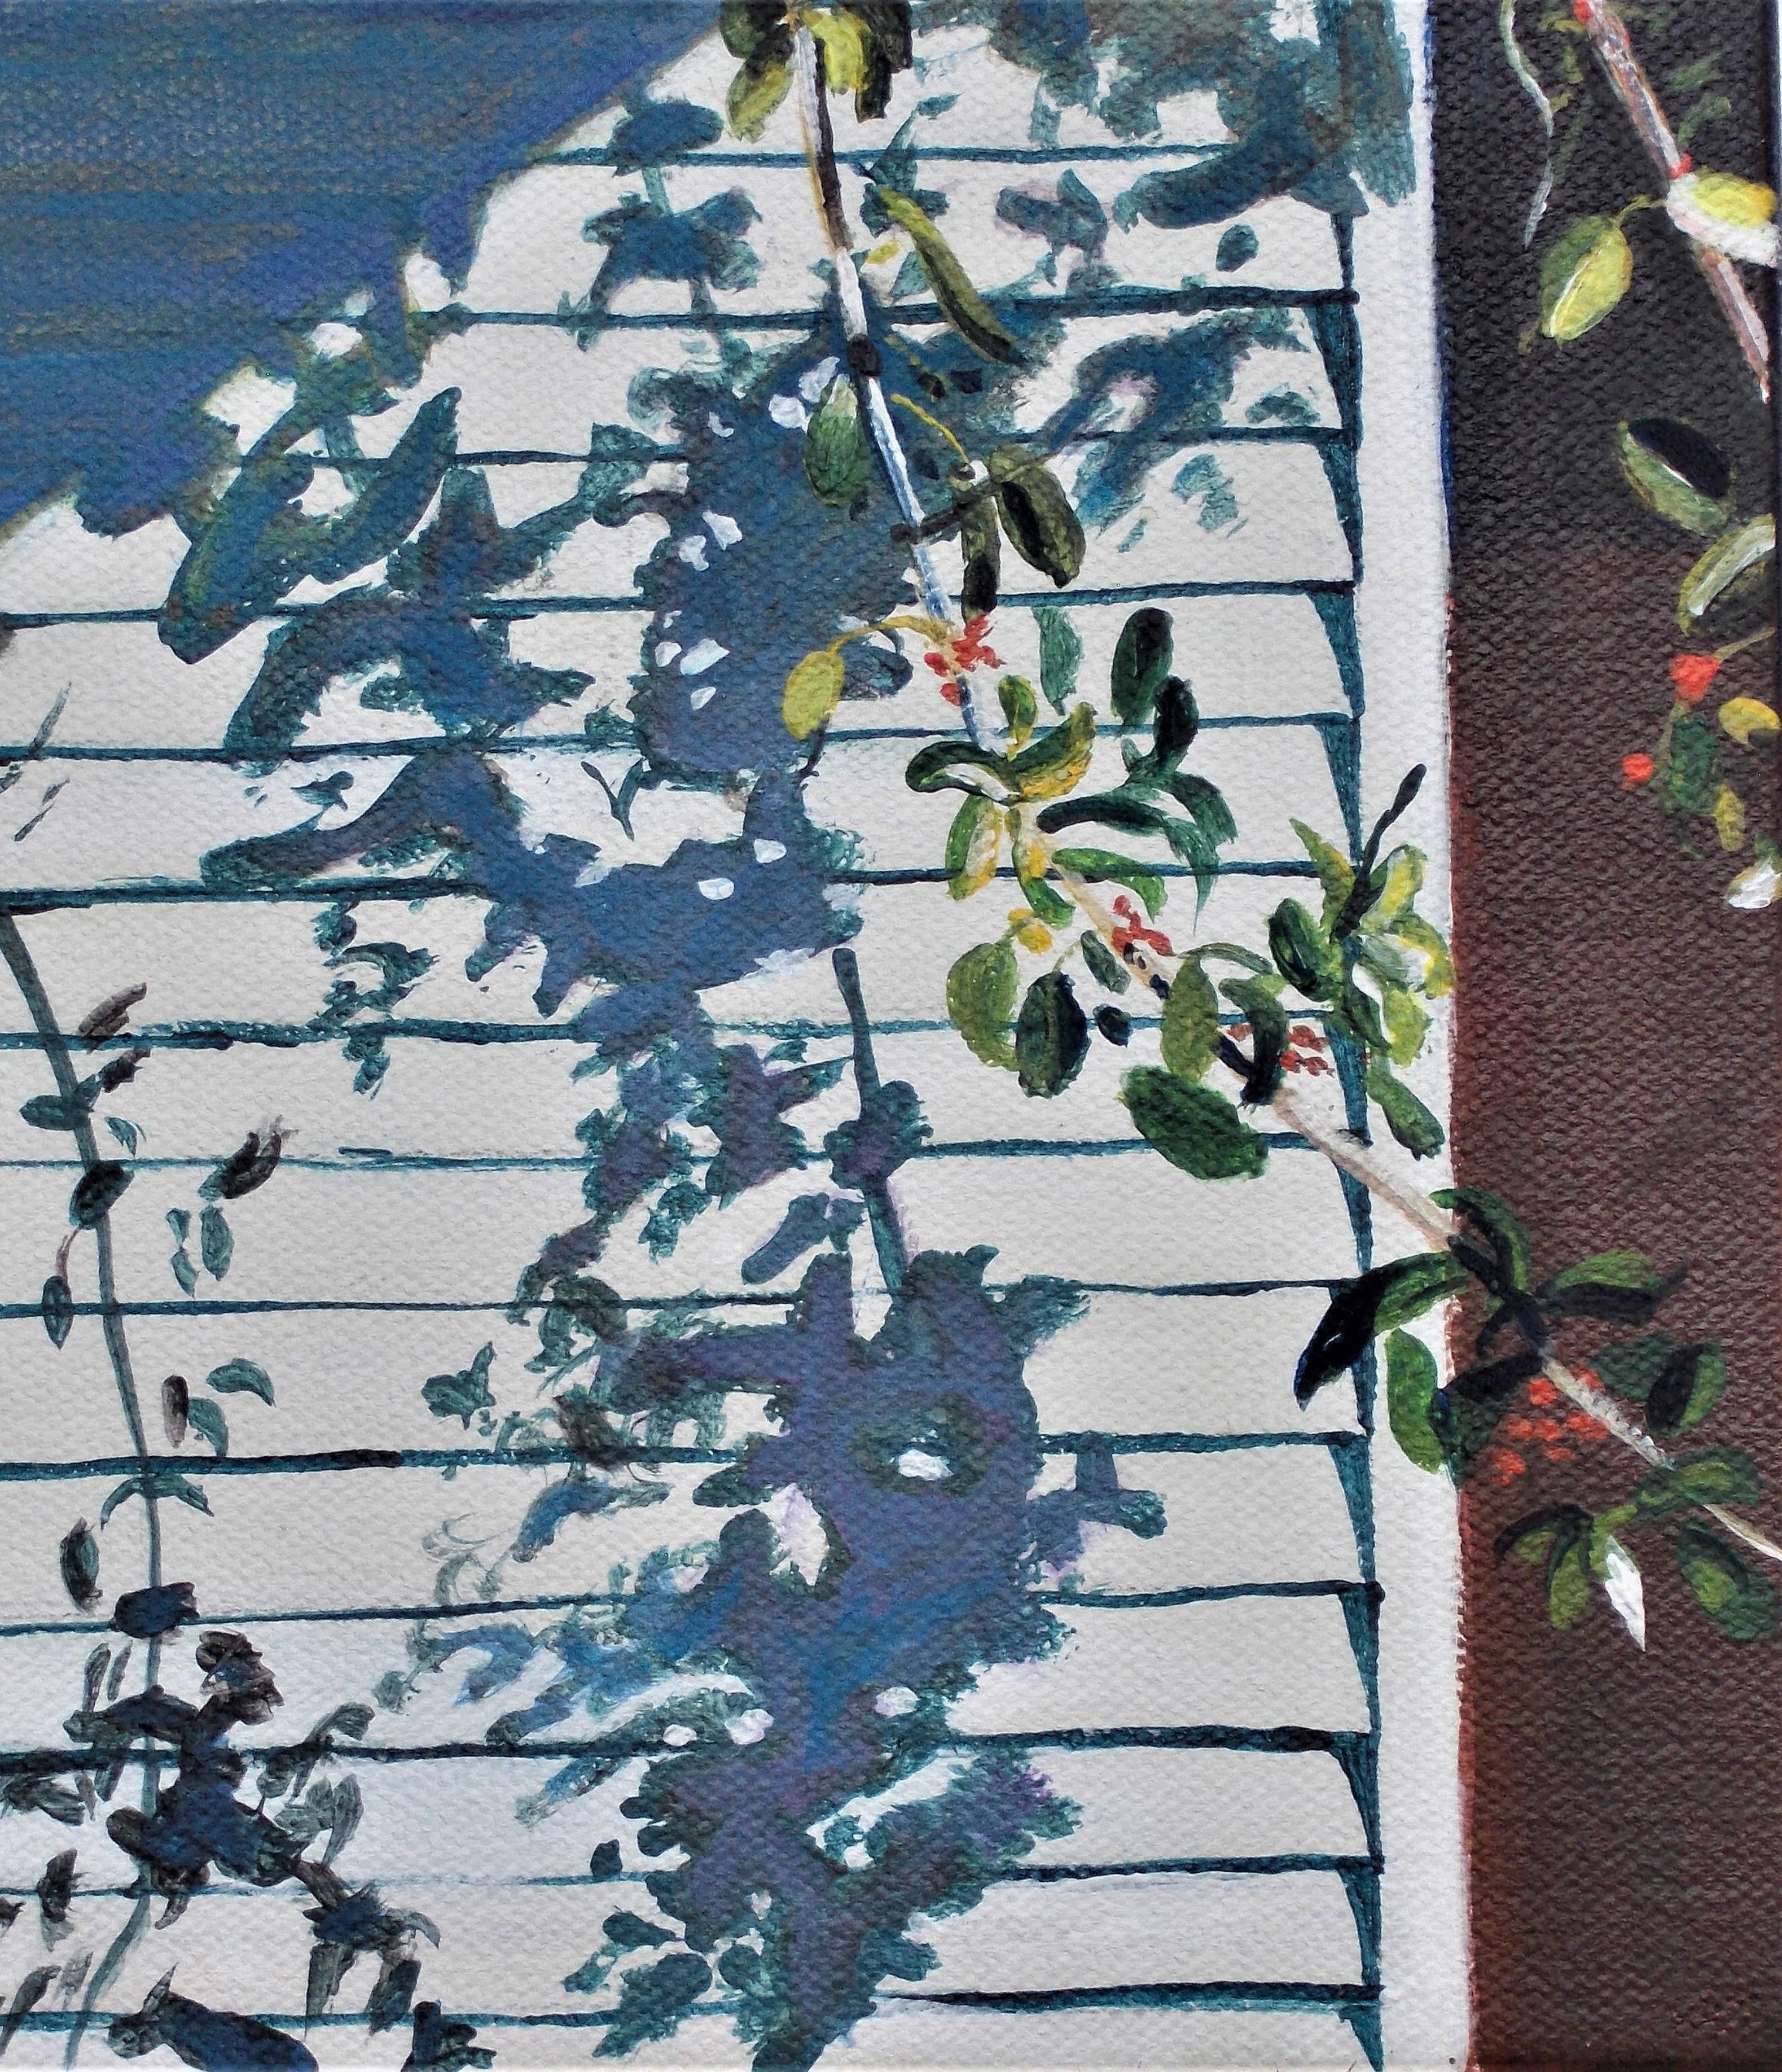 <p>Artist Comments<br>The beauty of the mundane shines on artist Benjamin Thomas' painting of a gracefully lit wall. He captures the brief moment while having lunch on the porch with his wife as the sun shines. 